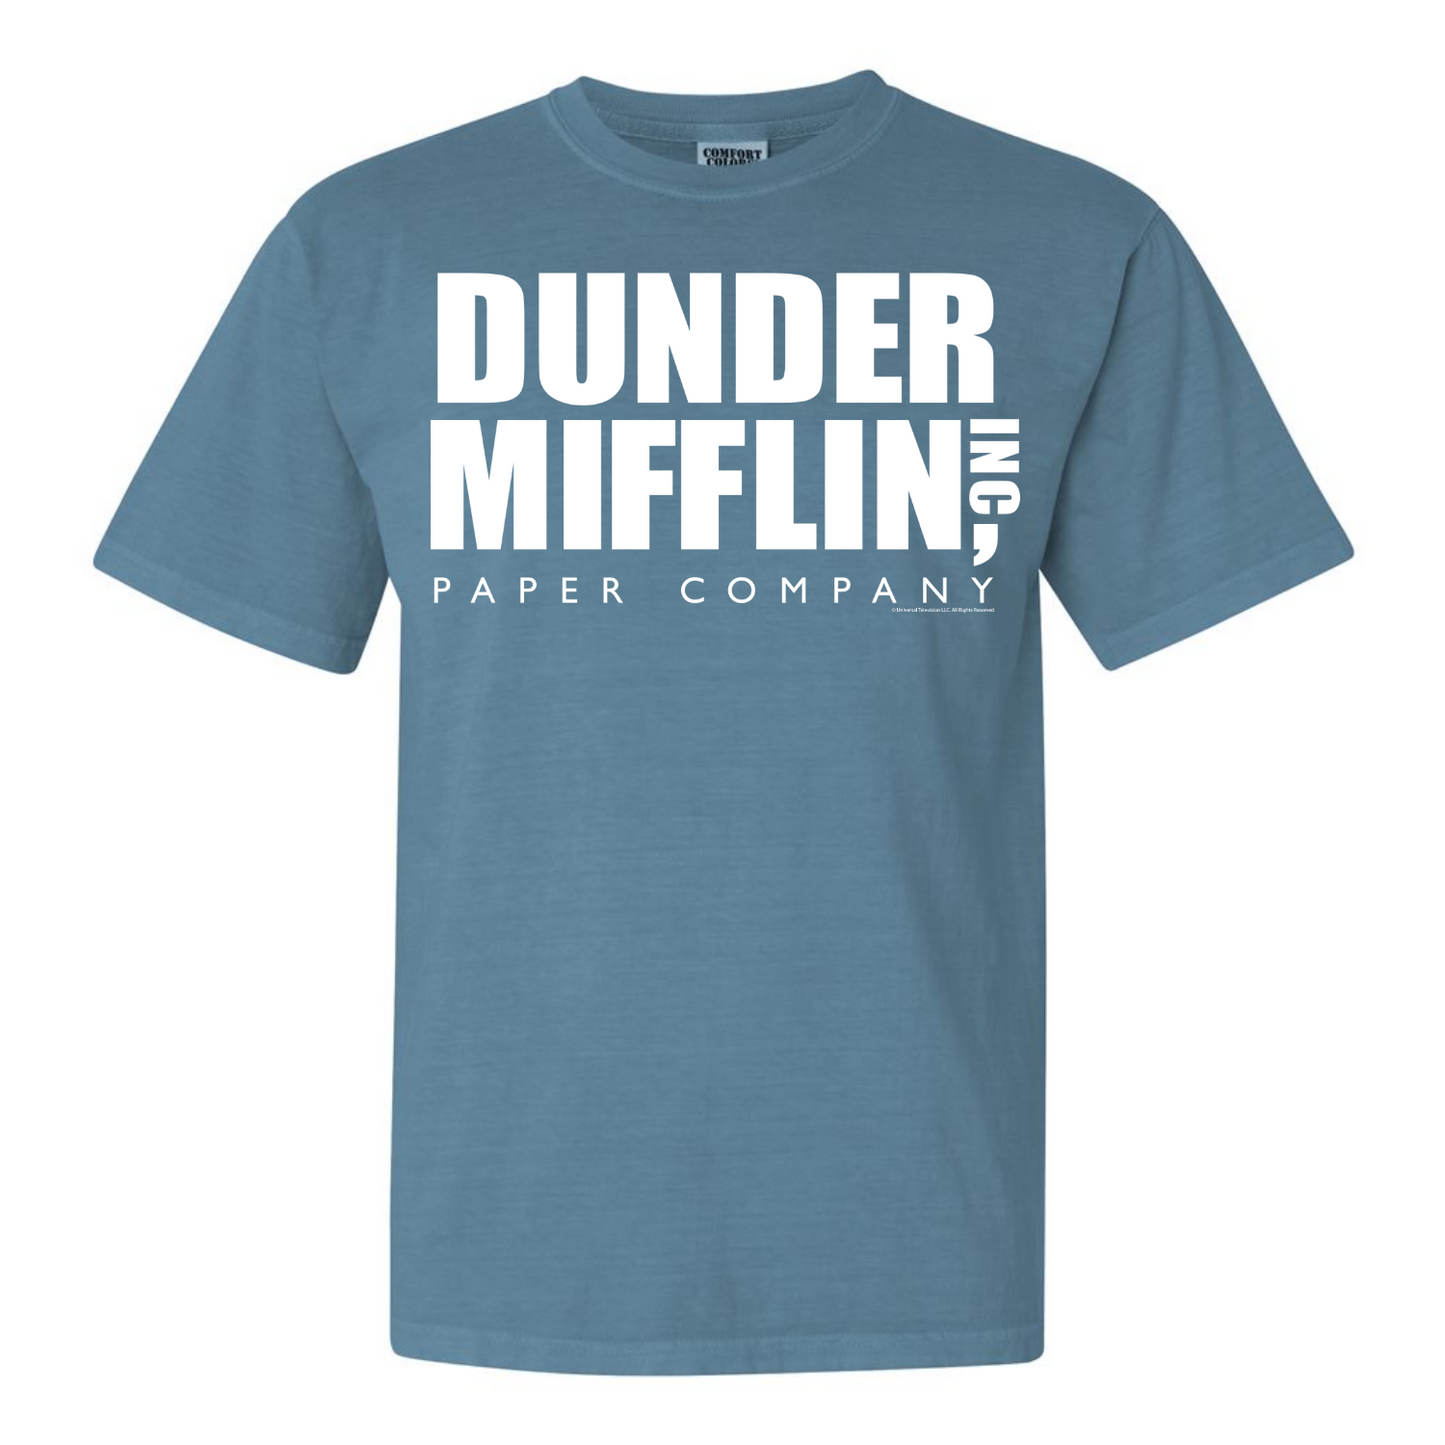 Trademarks: The Fight for “Dunder Mifflin” Rights 